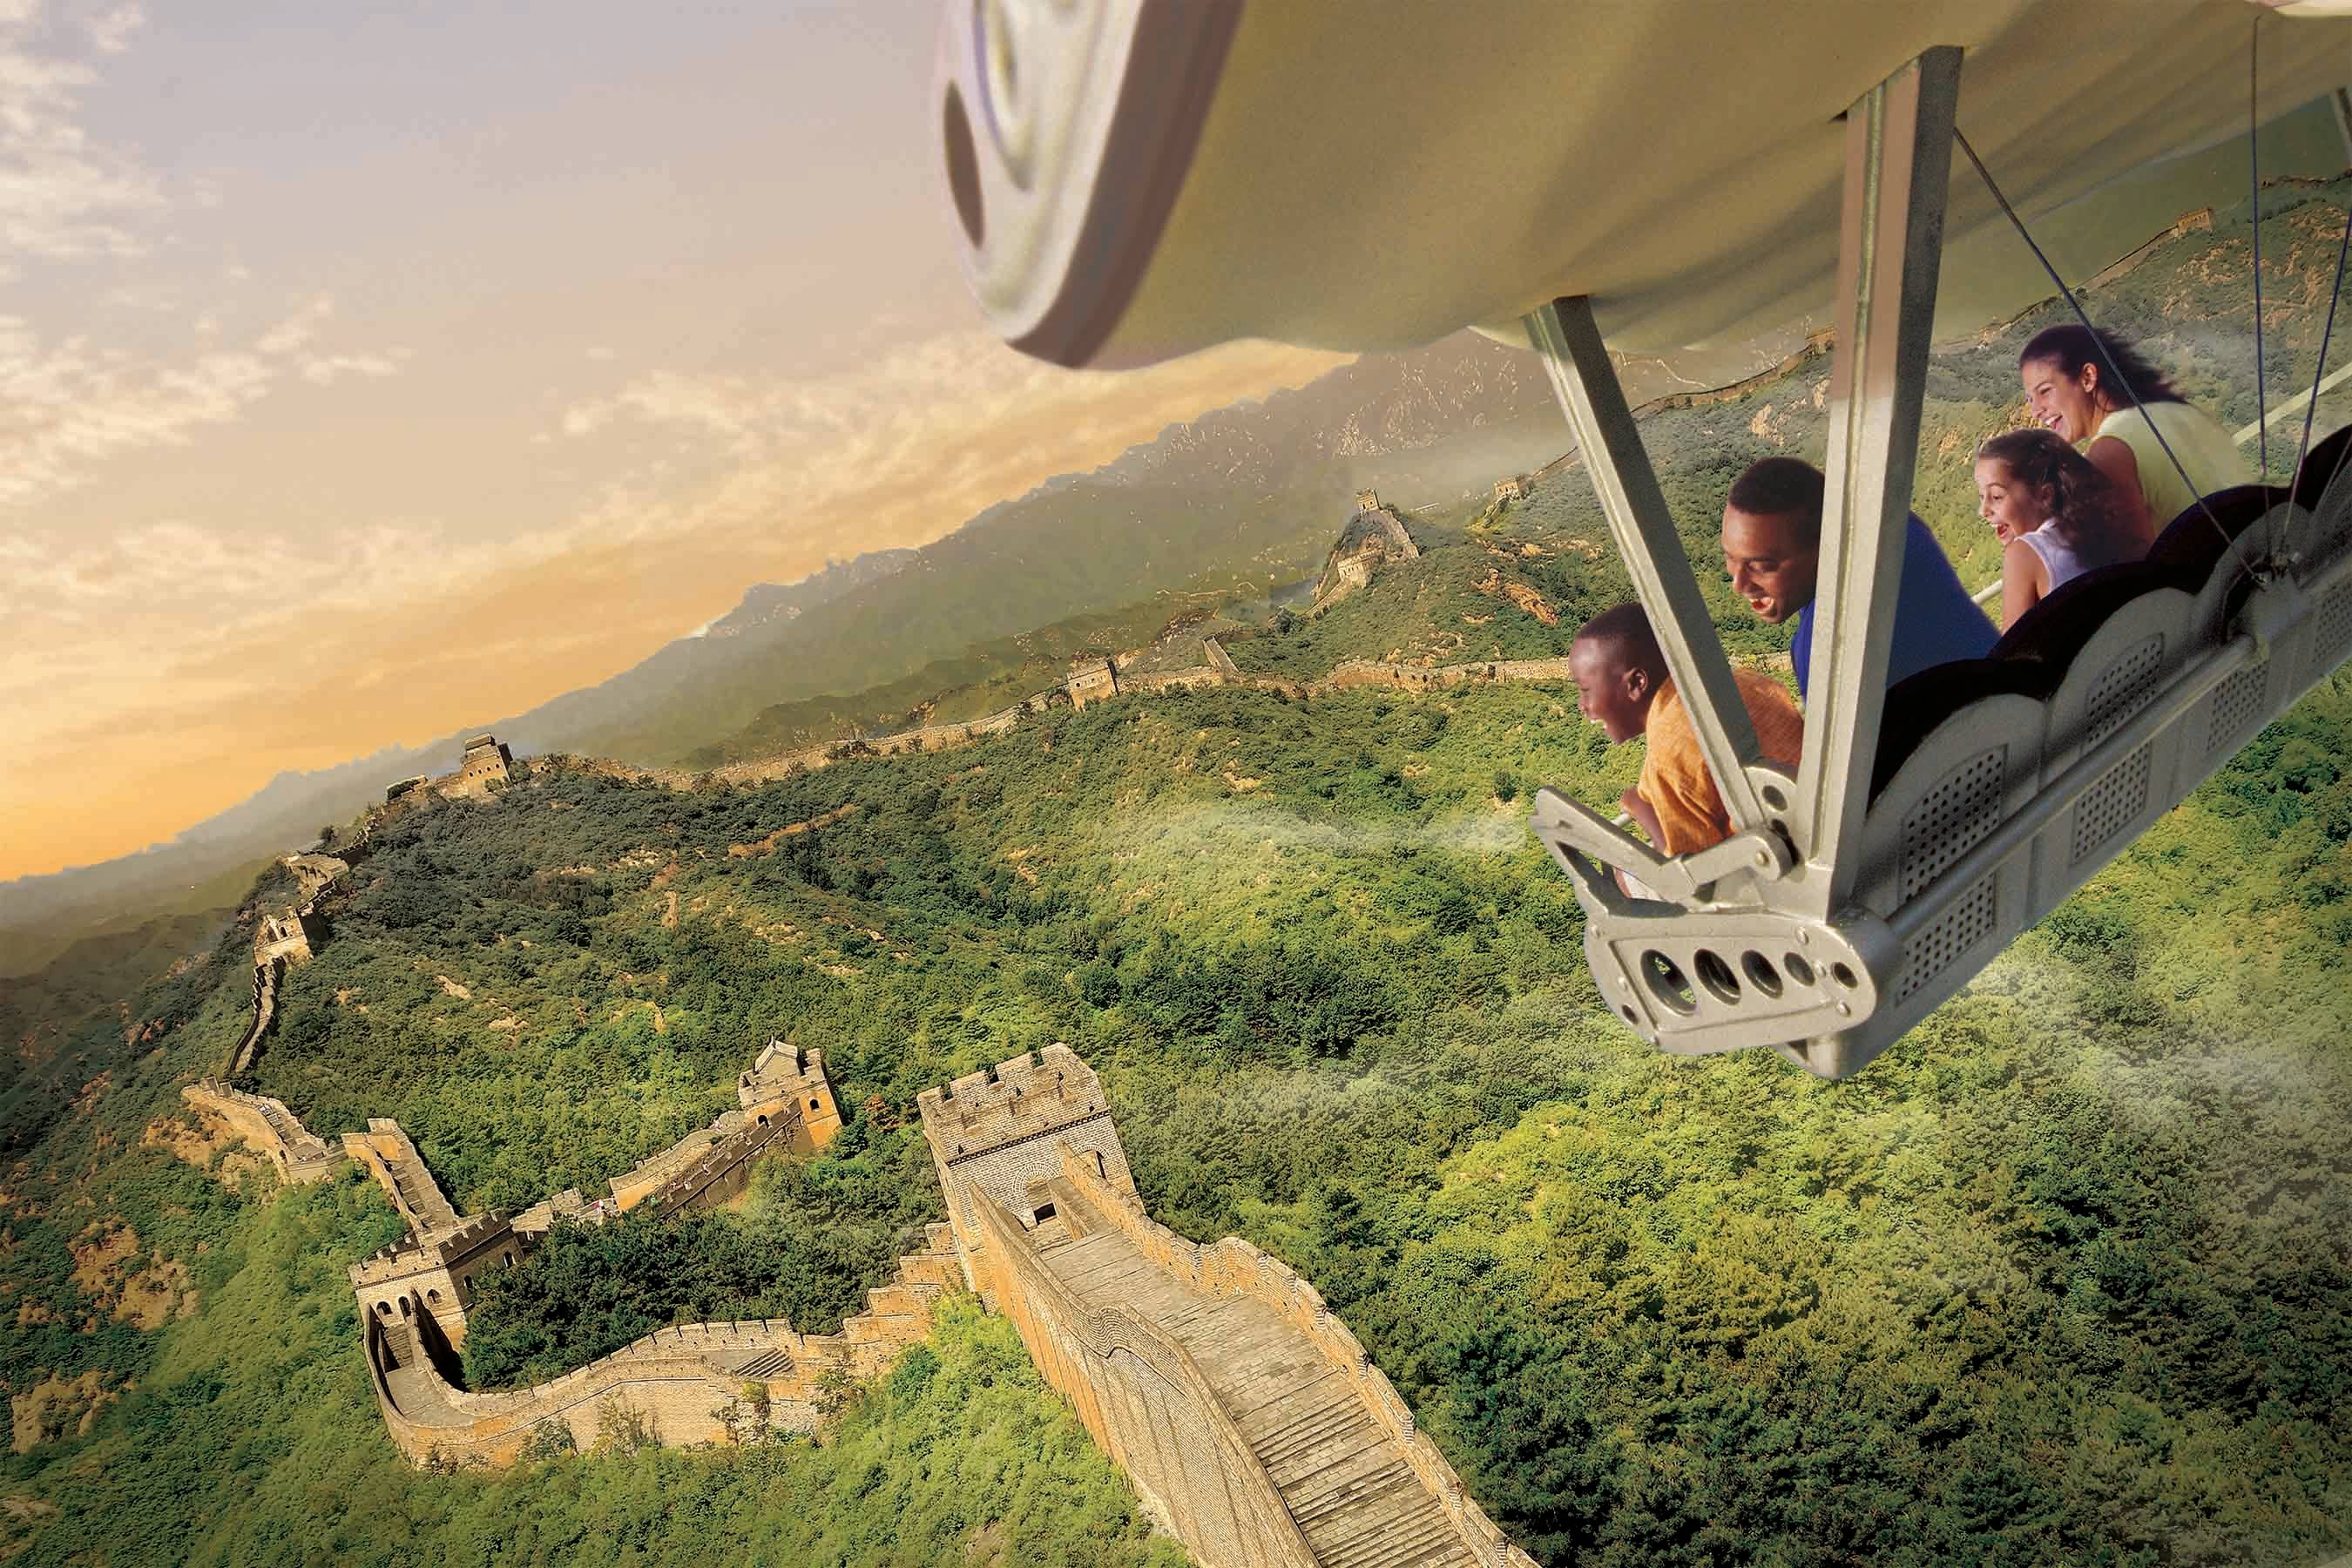 Paperwork filed for addition to Soarin' as speculation of adding a third theater builds